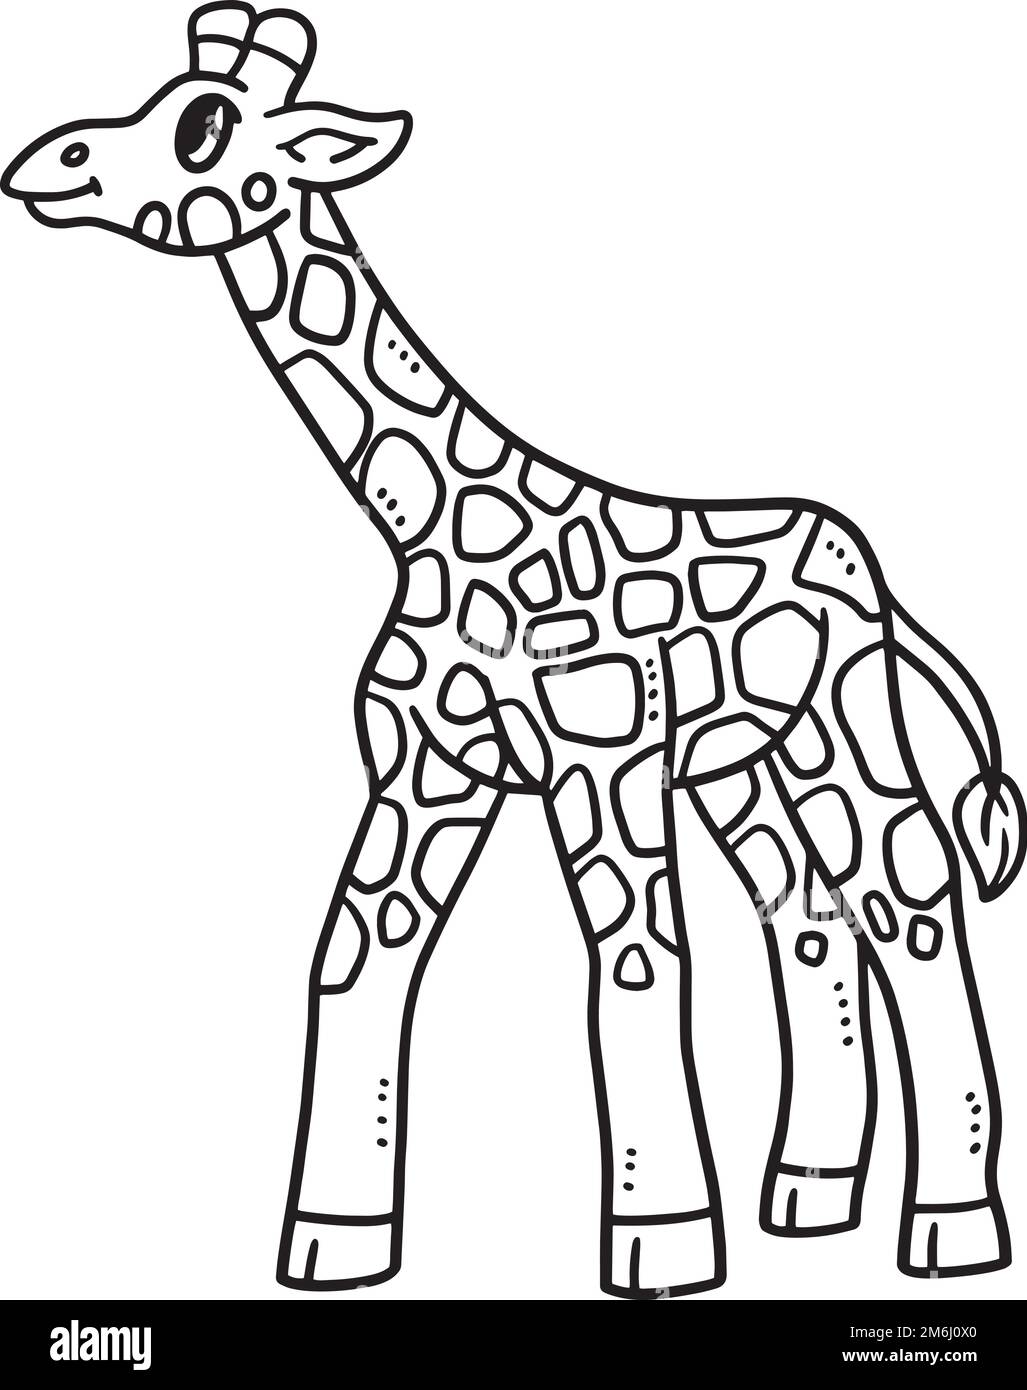 Baby Giraffe Isolated Coloring Page for Kids Stock Vector